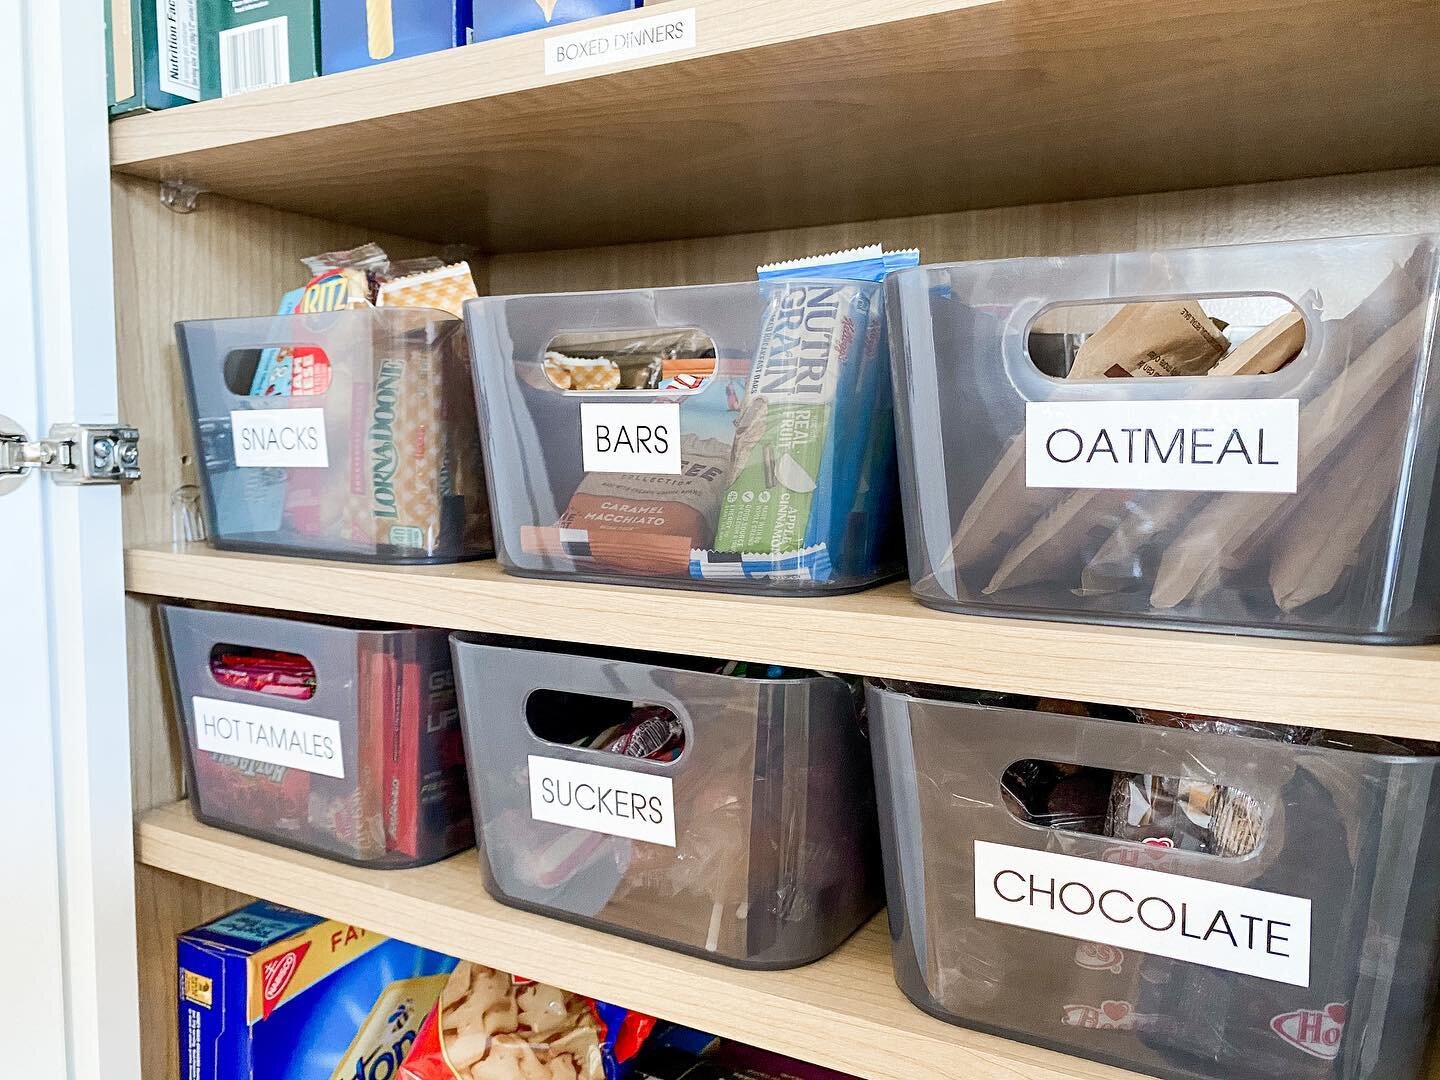 These plastics storage bins are on our favorite product list! They are one of our most used products due to the price and versatility. They also come in white and clear.